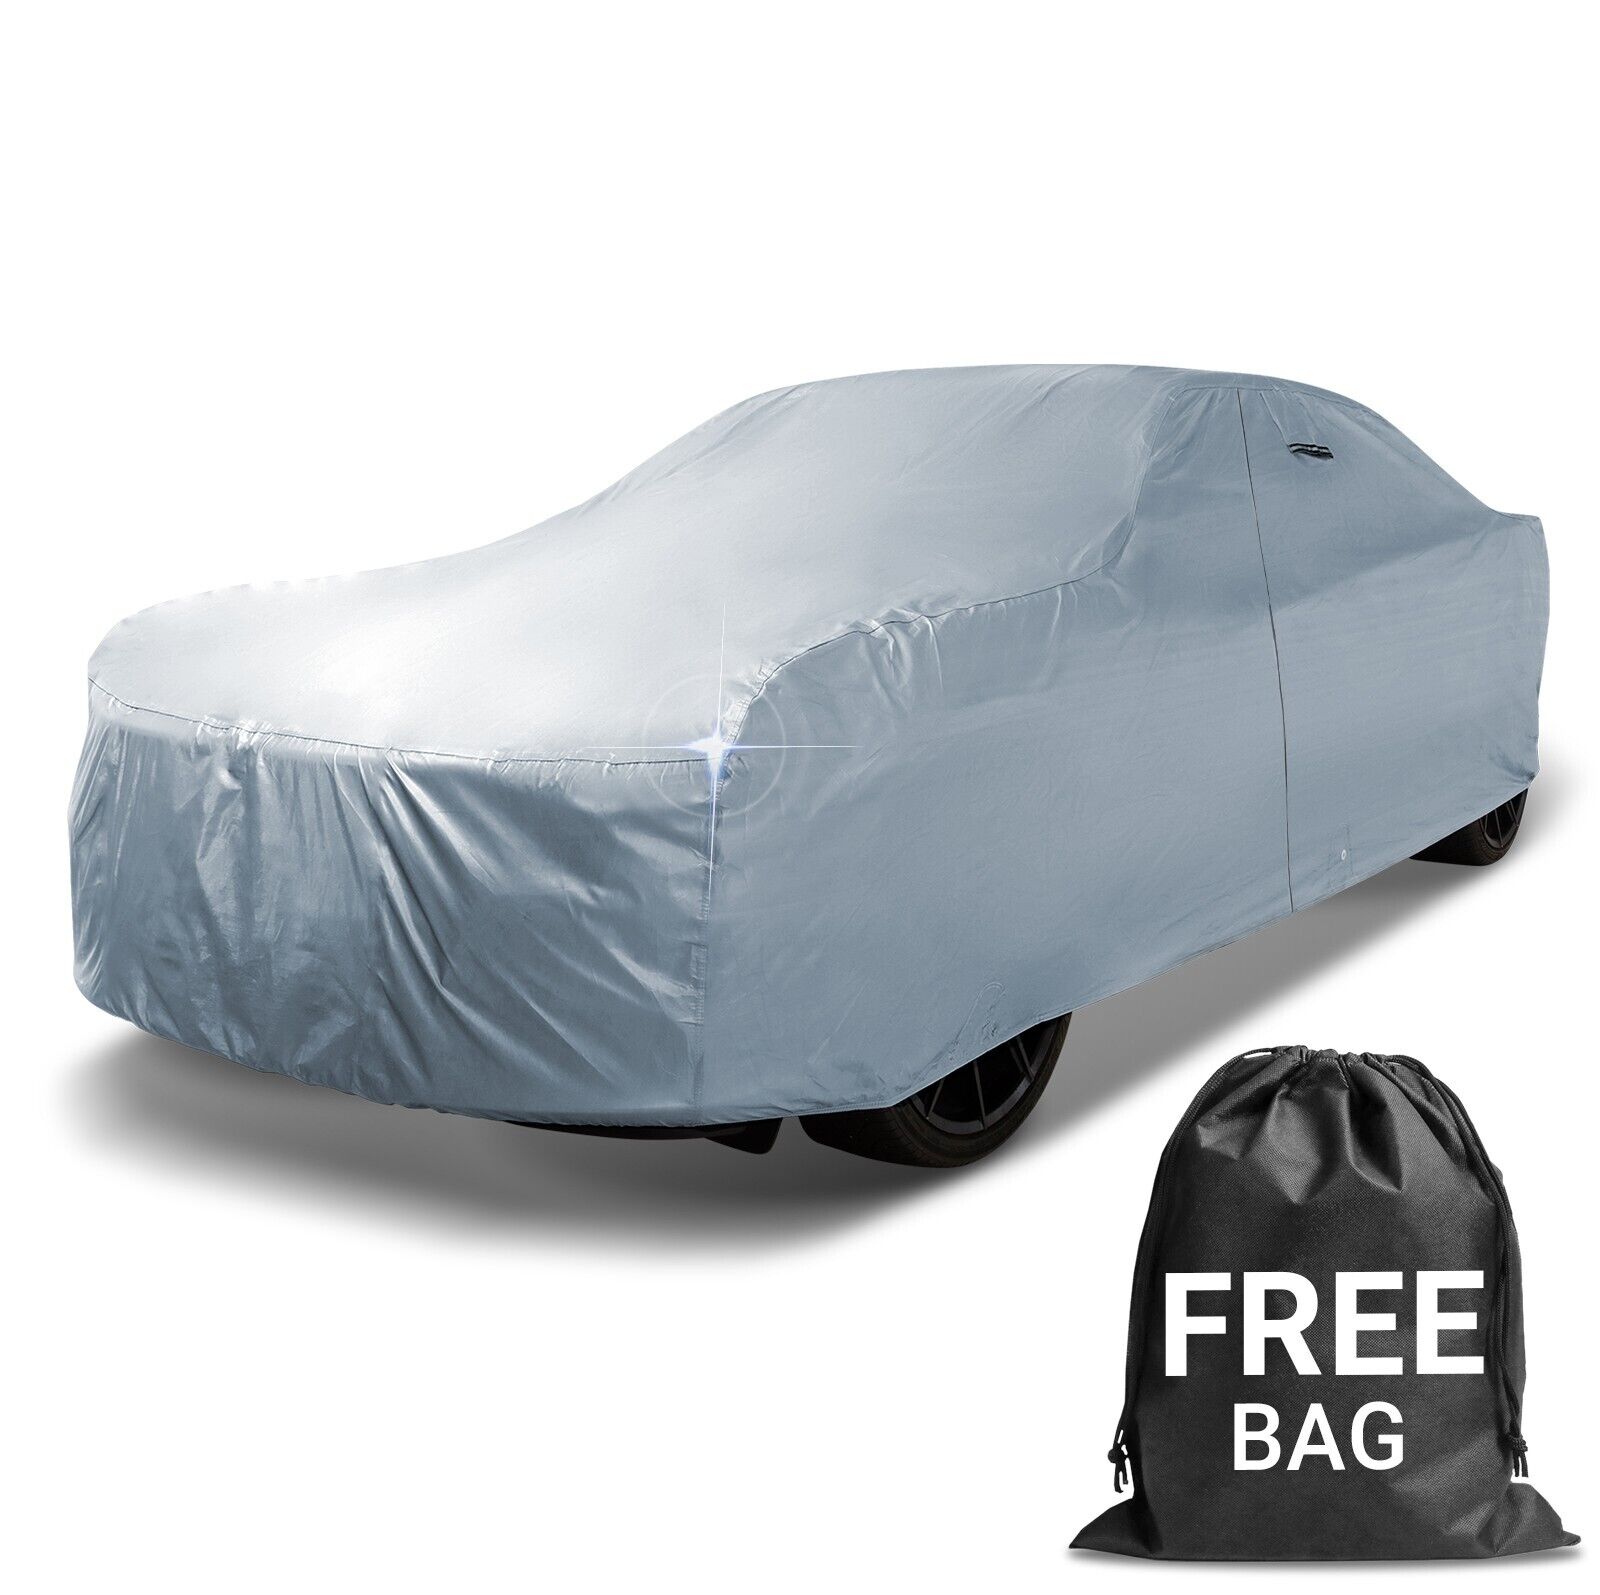 1971-1975 Pontiac GrandVille Custom Car Cover All-Weather Waterproof Protection